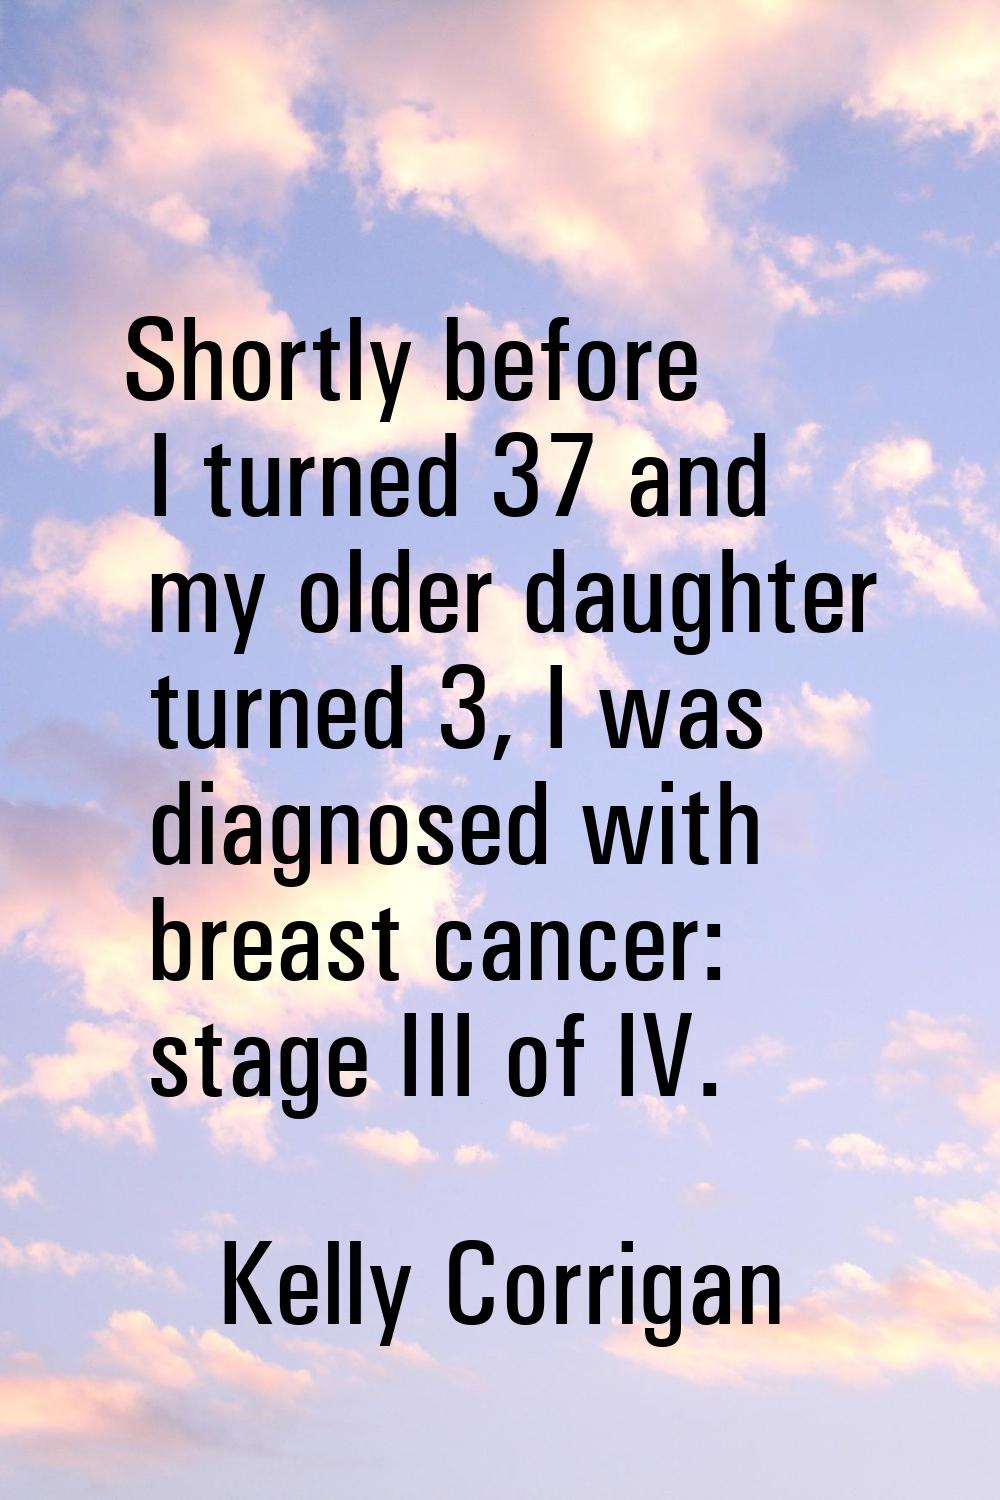 Shortly before I turned 37 and my older daughter turned 3, I was diagnosed with breast cancer: stag